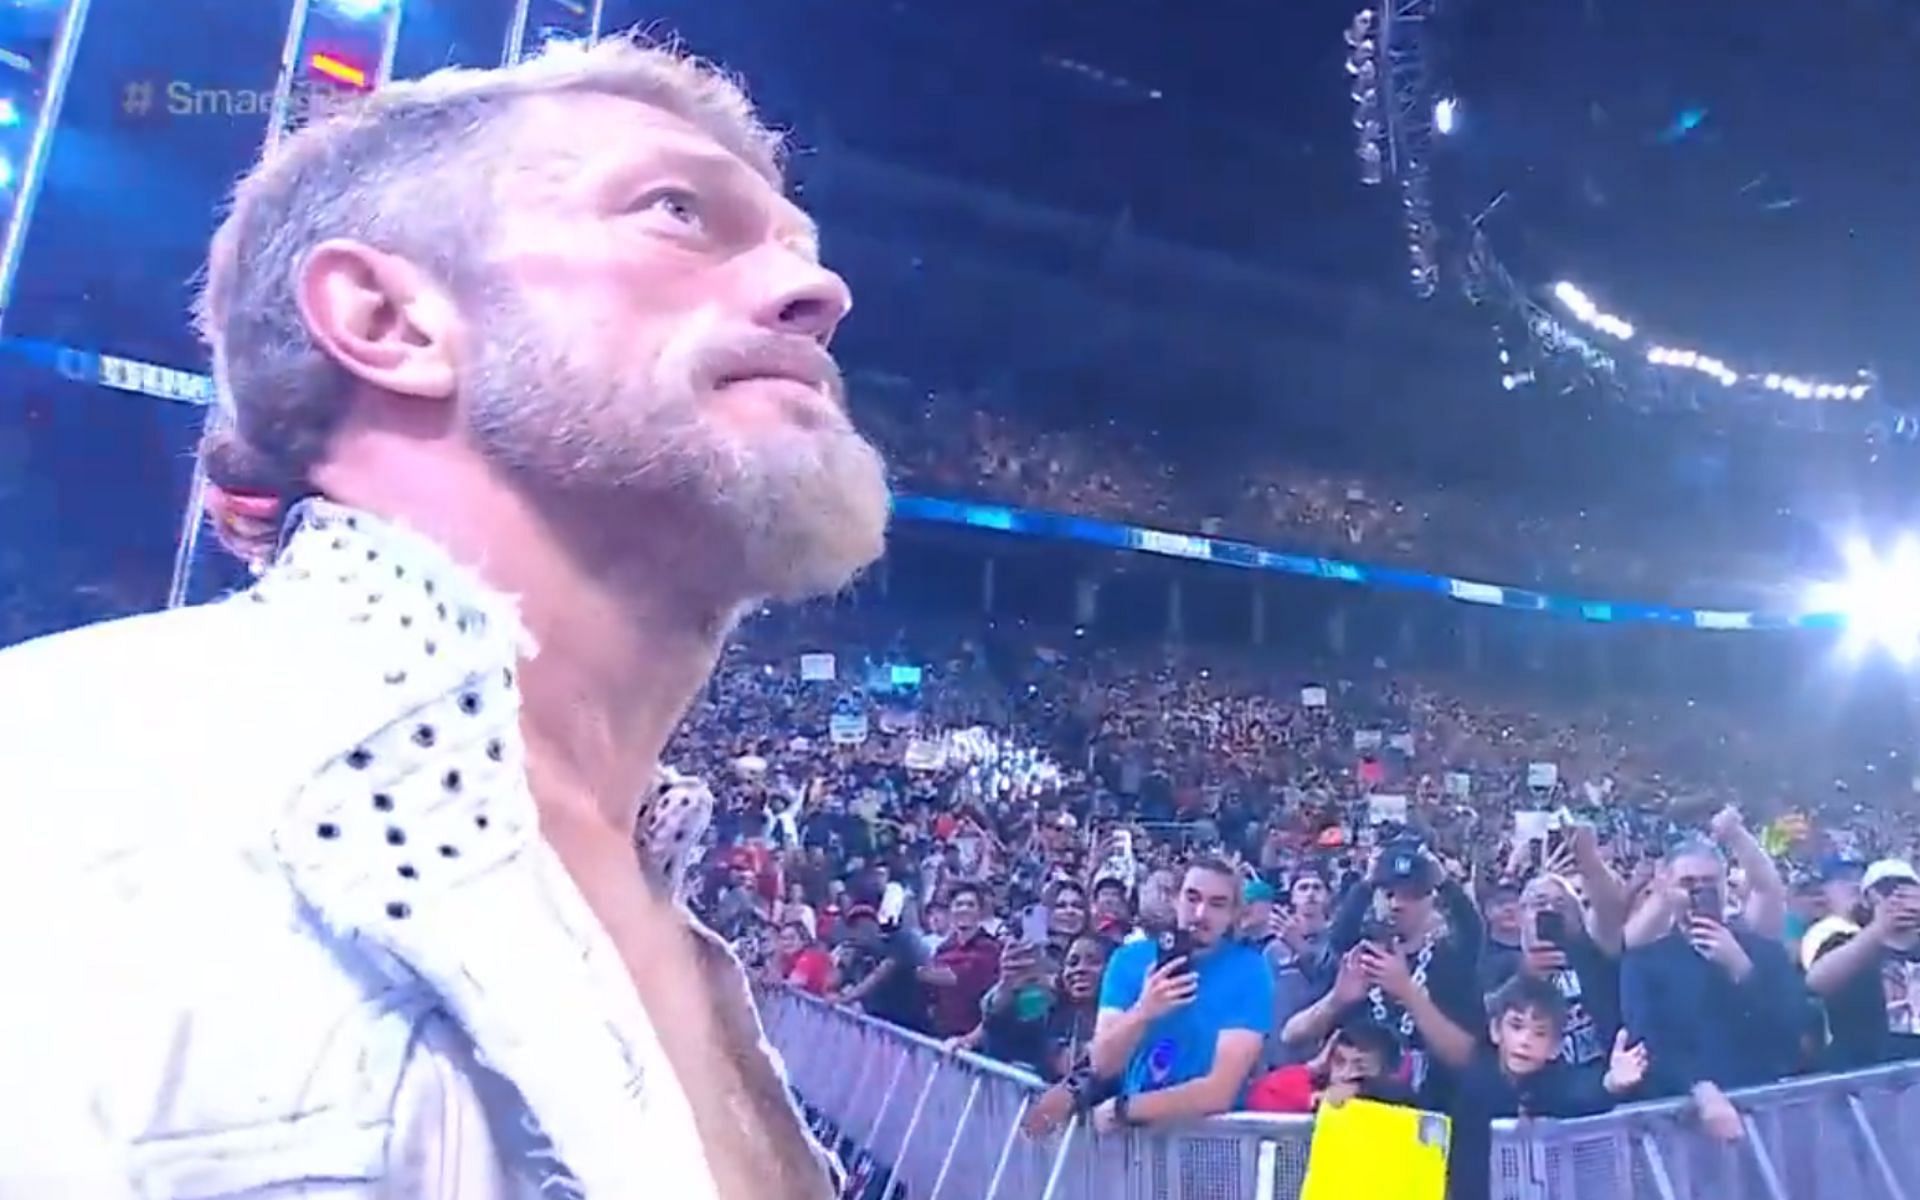 The Rated-R Superstar embracing the roar of the crowd for possibly the last time